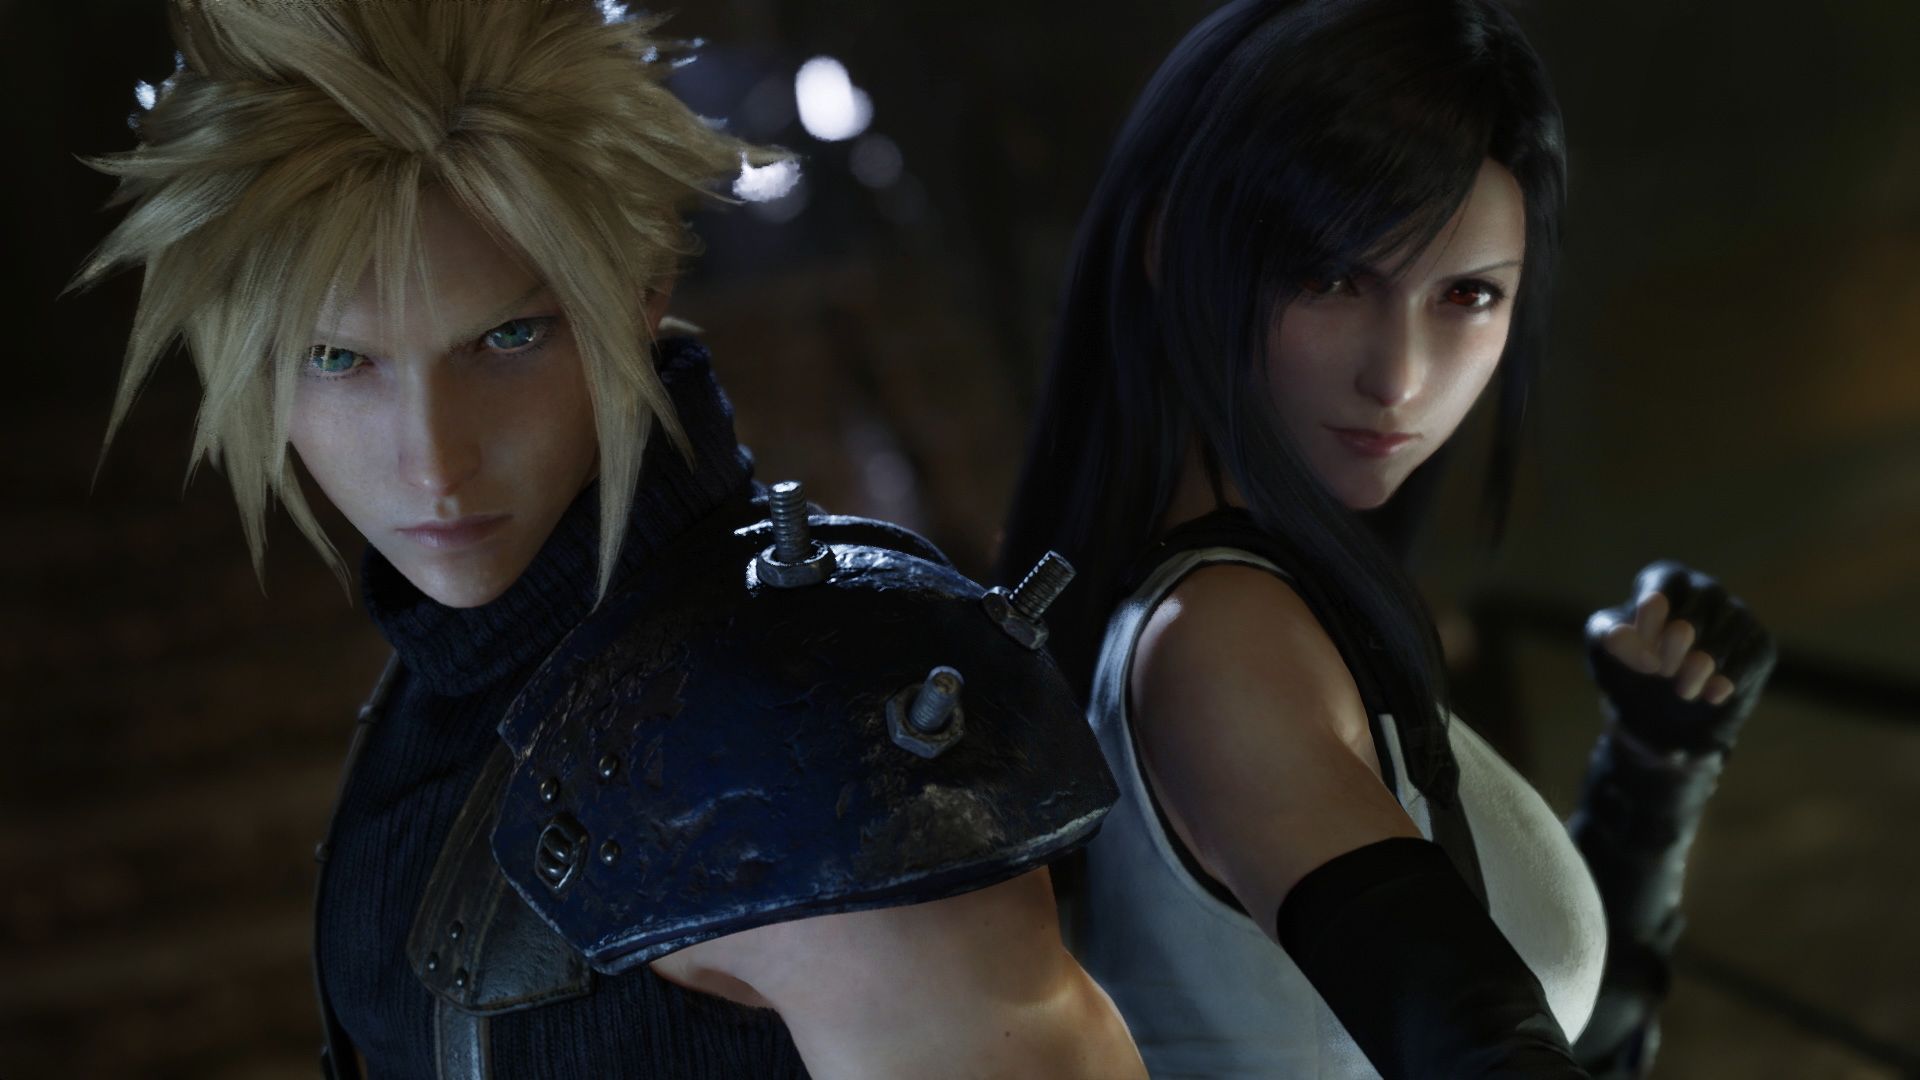 Final Fantasy VII Remake spoiler-free review: Our kind of Cloud gaming